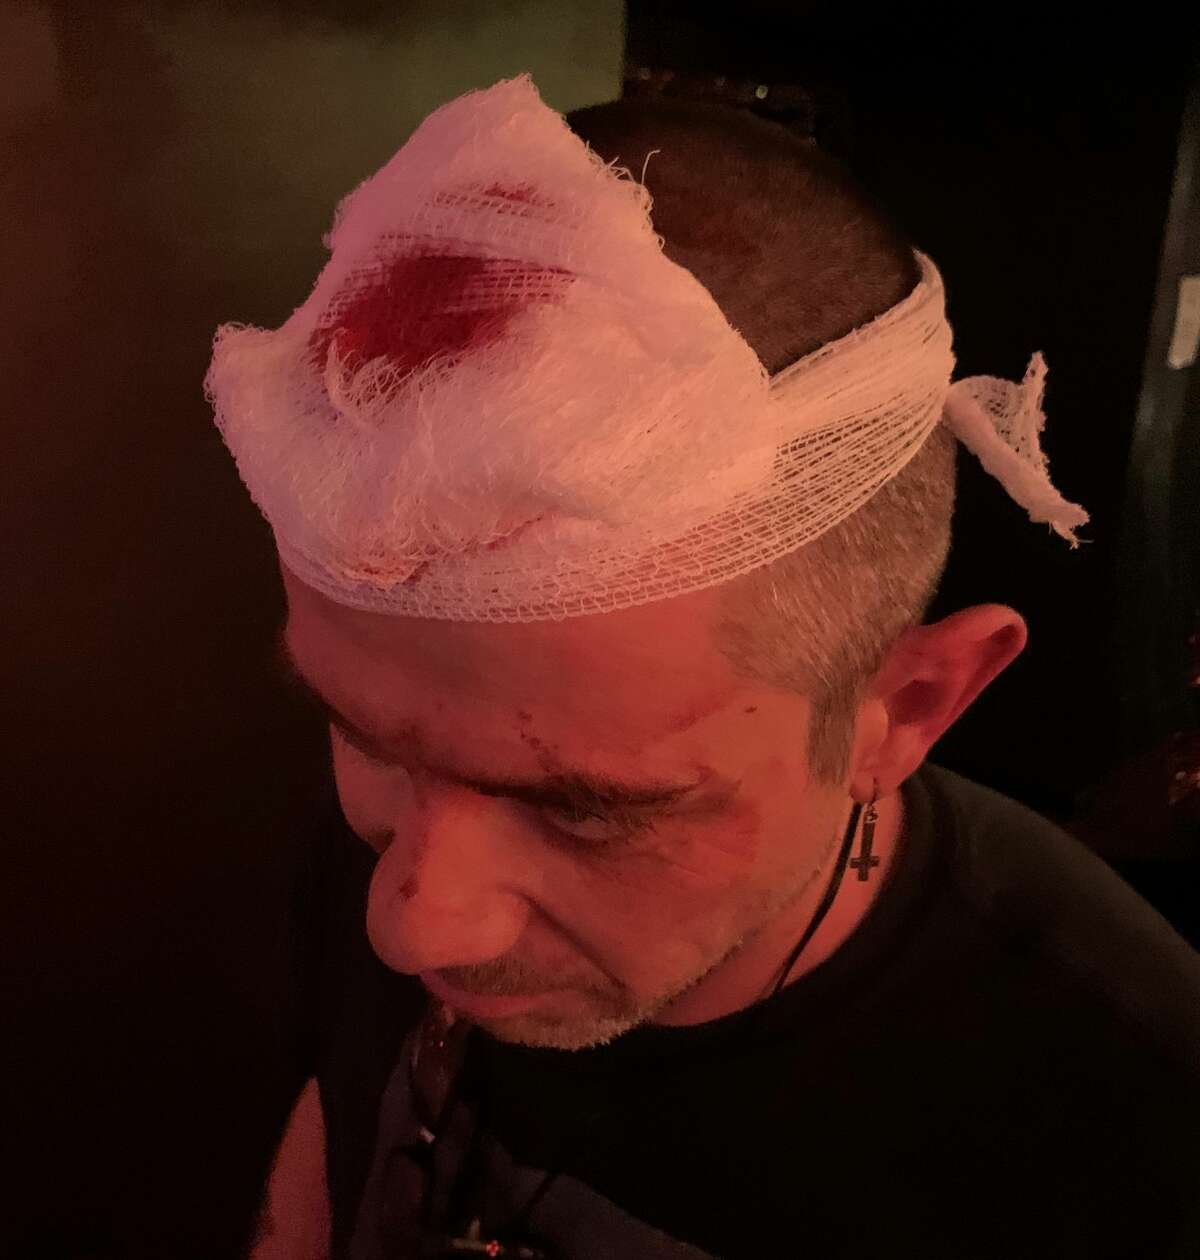 An employee at Grand Prize Bar in Houston was assaulted after asking a customer to wear a mask.